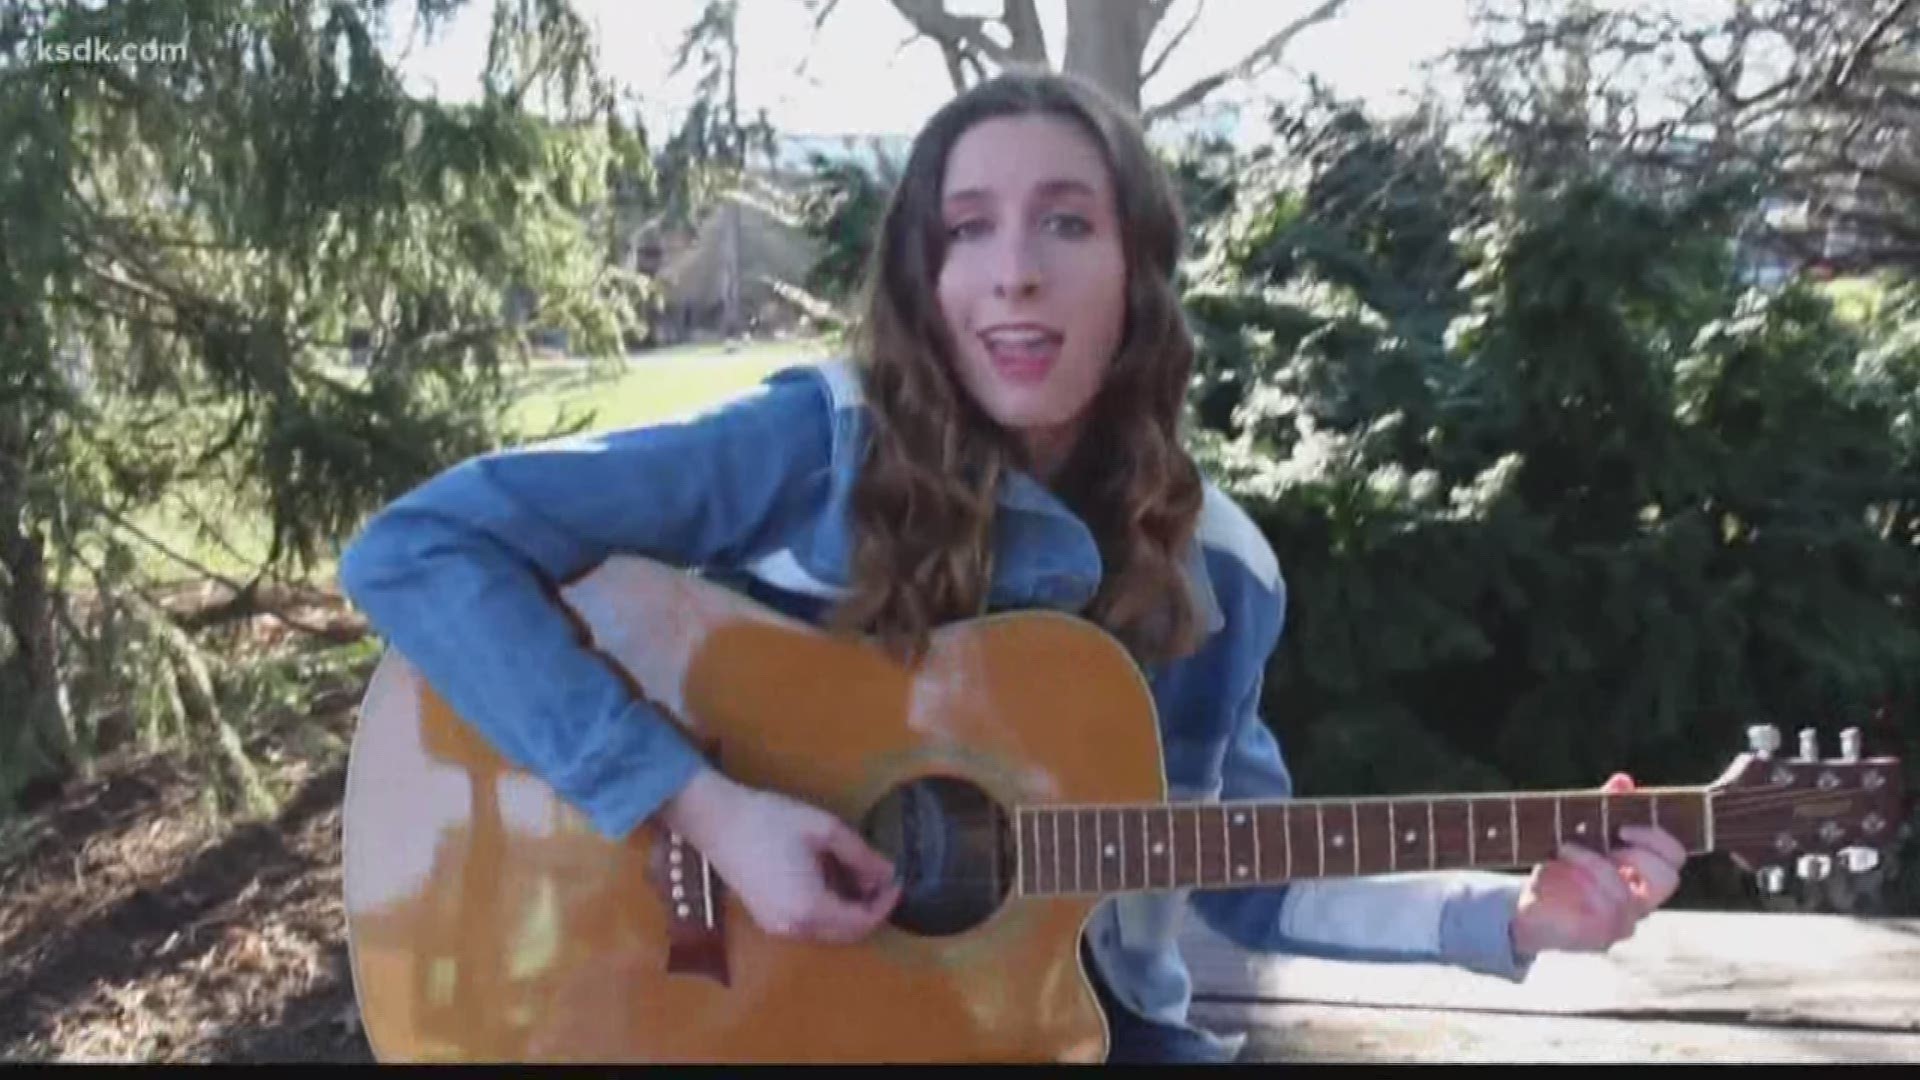 A Belleville native is in the running to win a songwriting competition, but to her, it's about more than winning a scholarship.